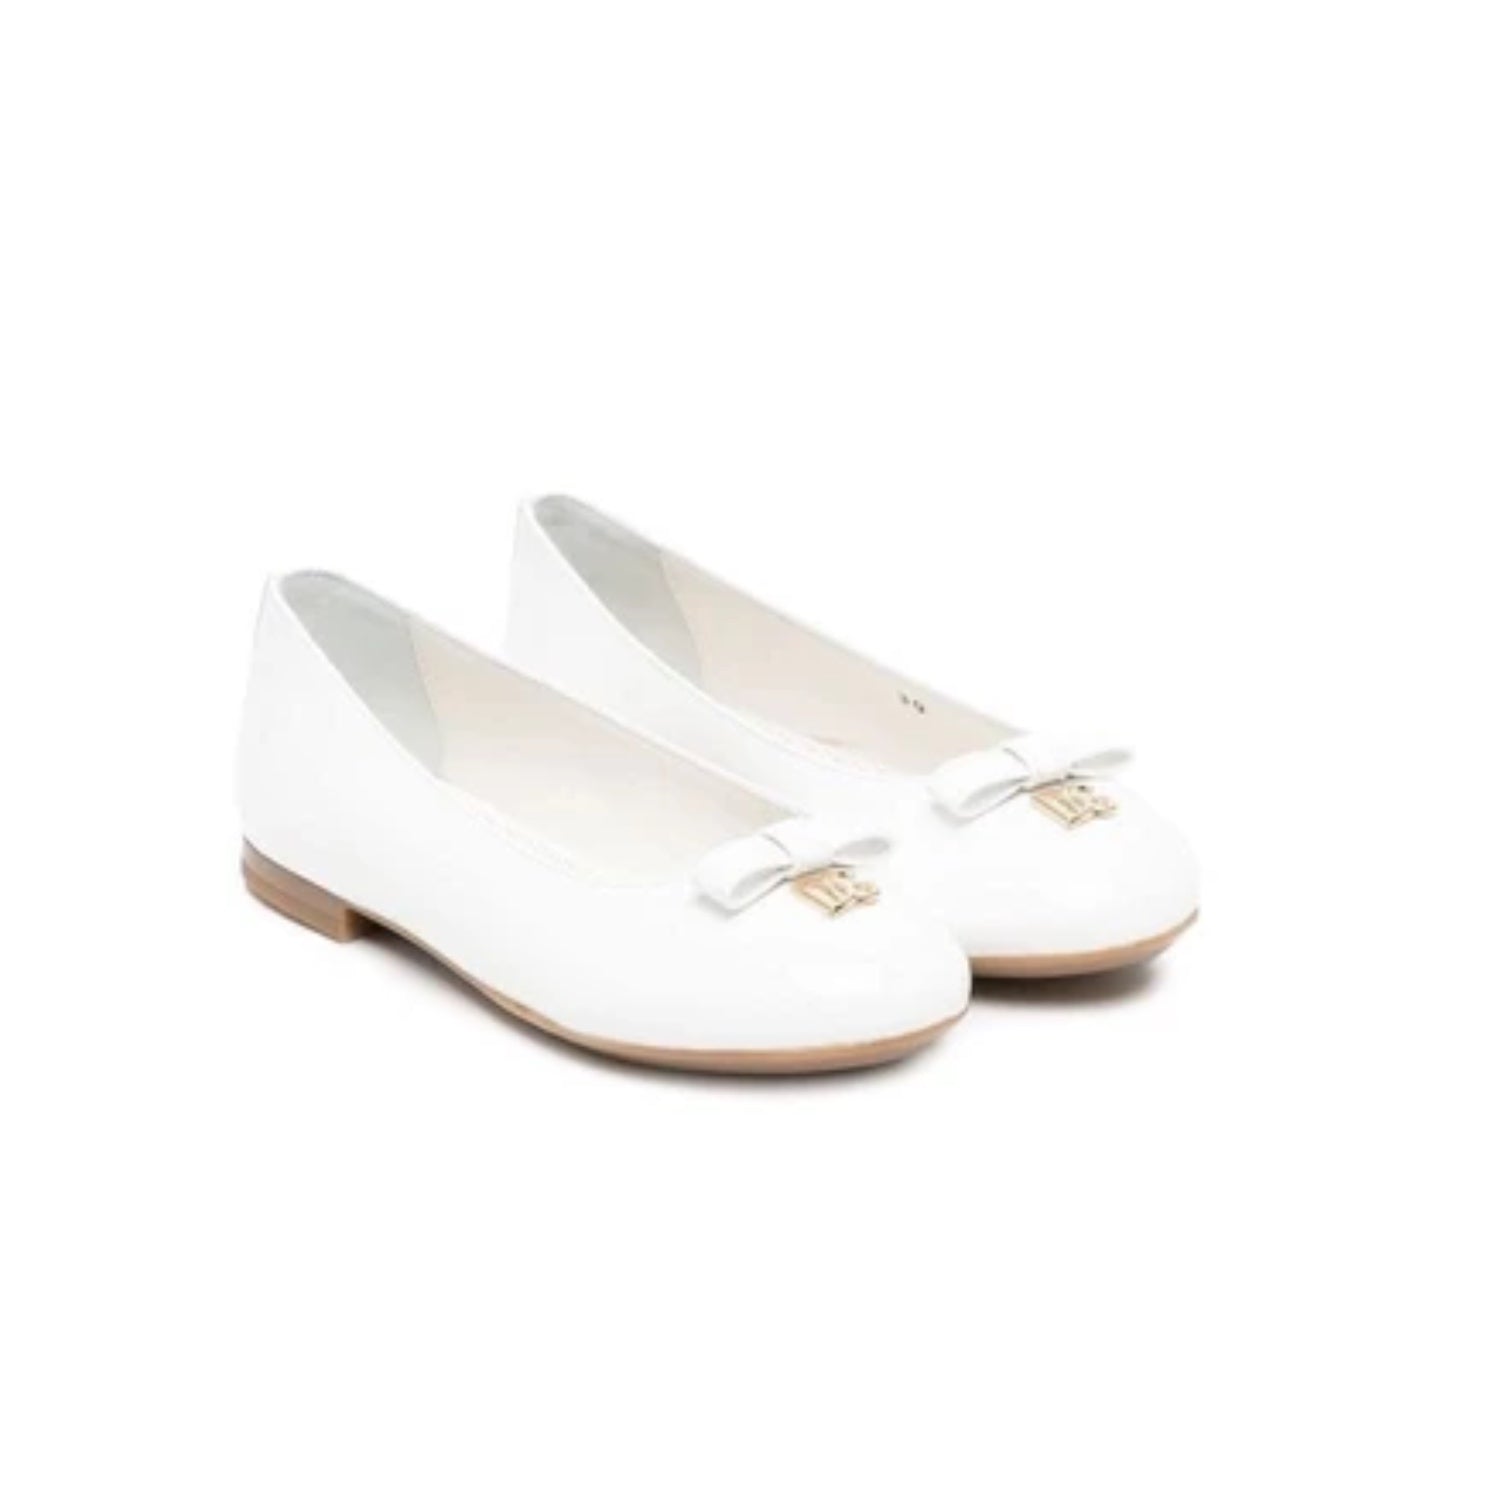 bow-detail ballerina shoes in white